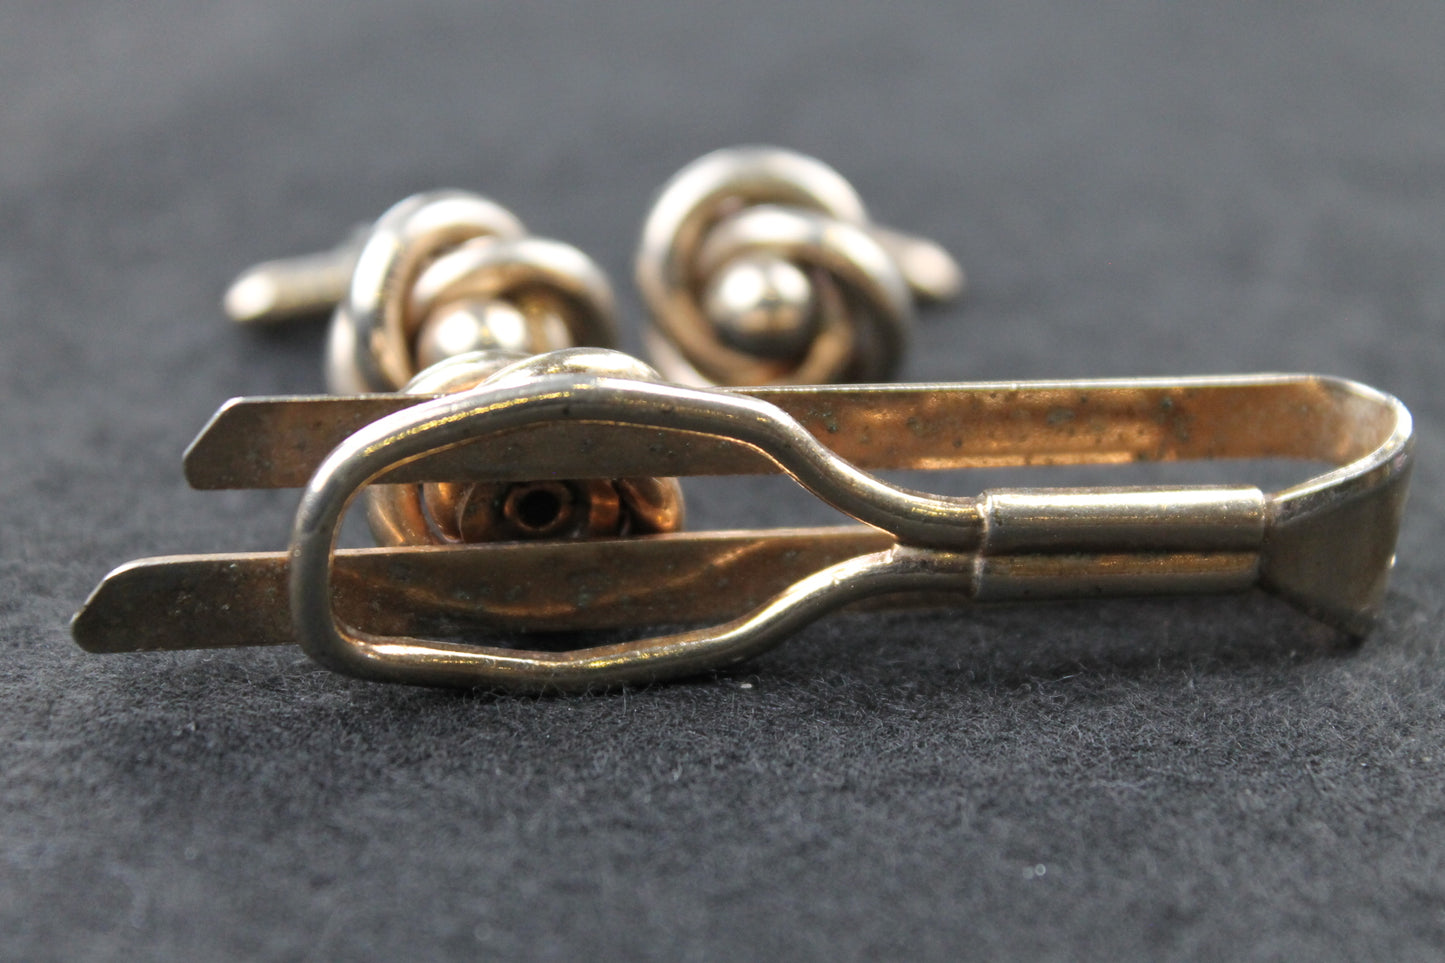 Vintage Knot and Ball Cufflinks and Tie Clip Set